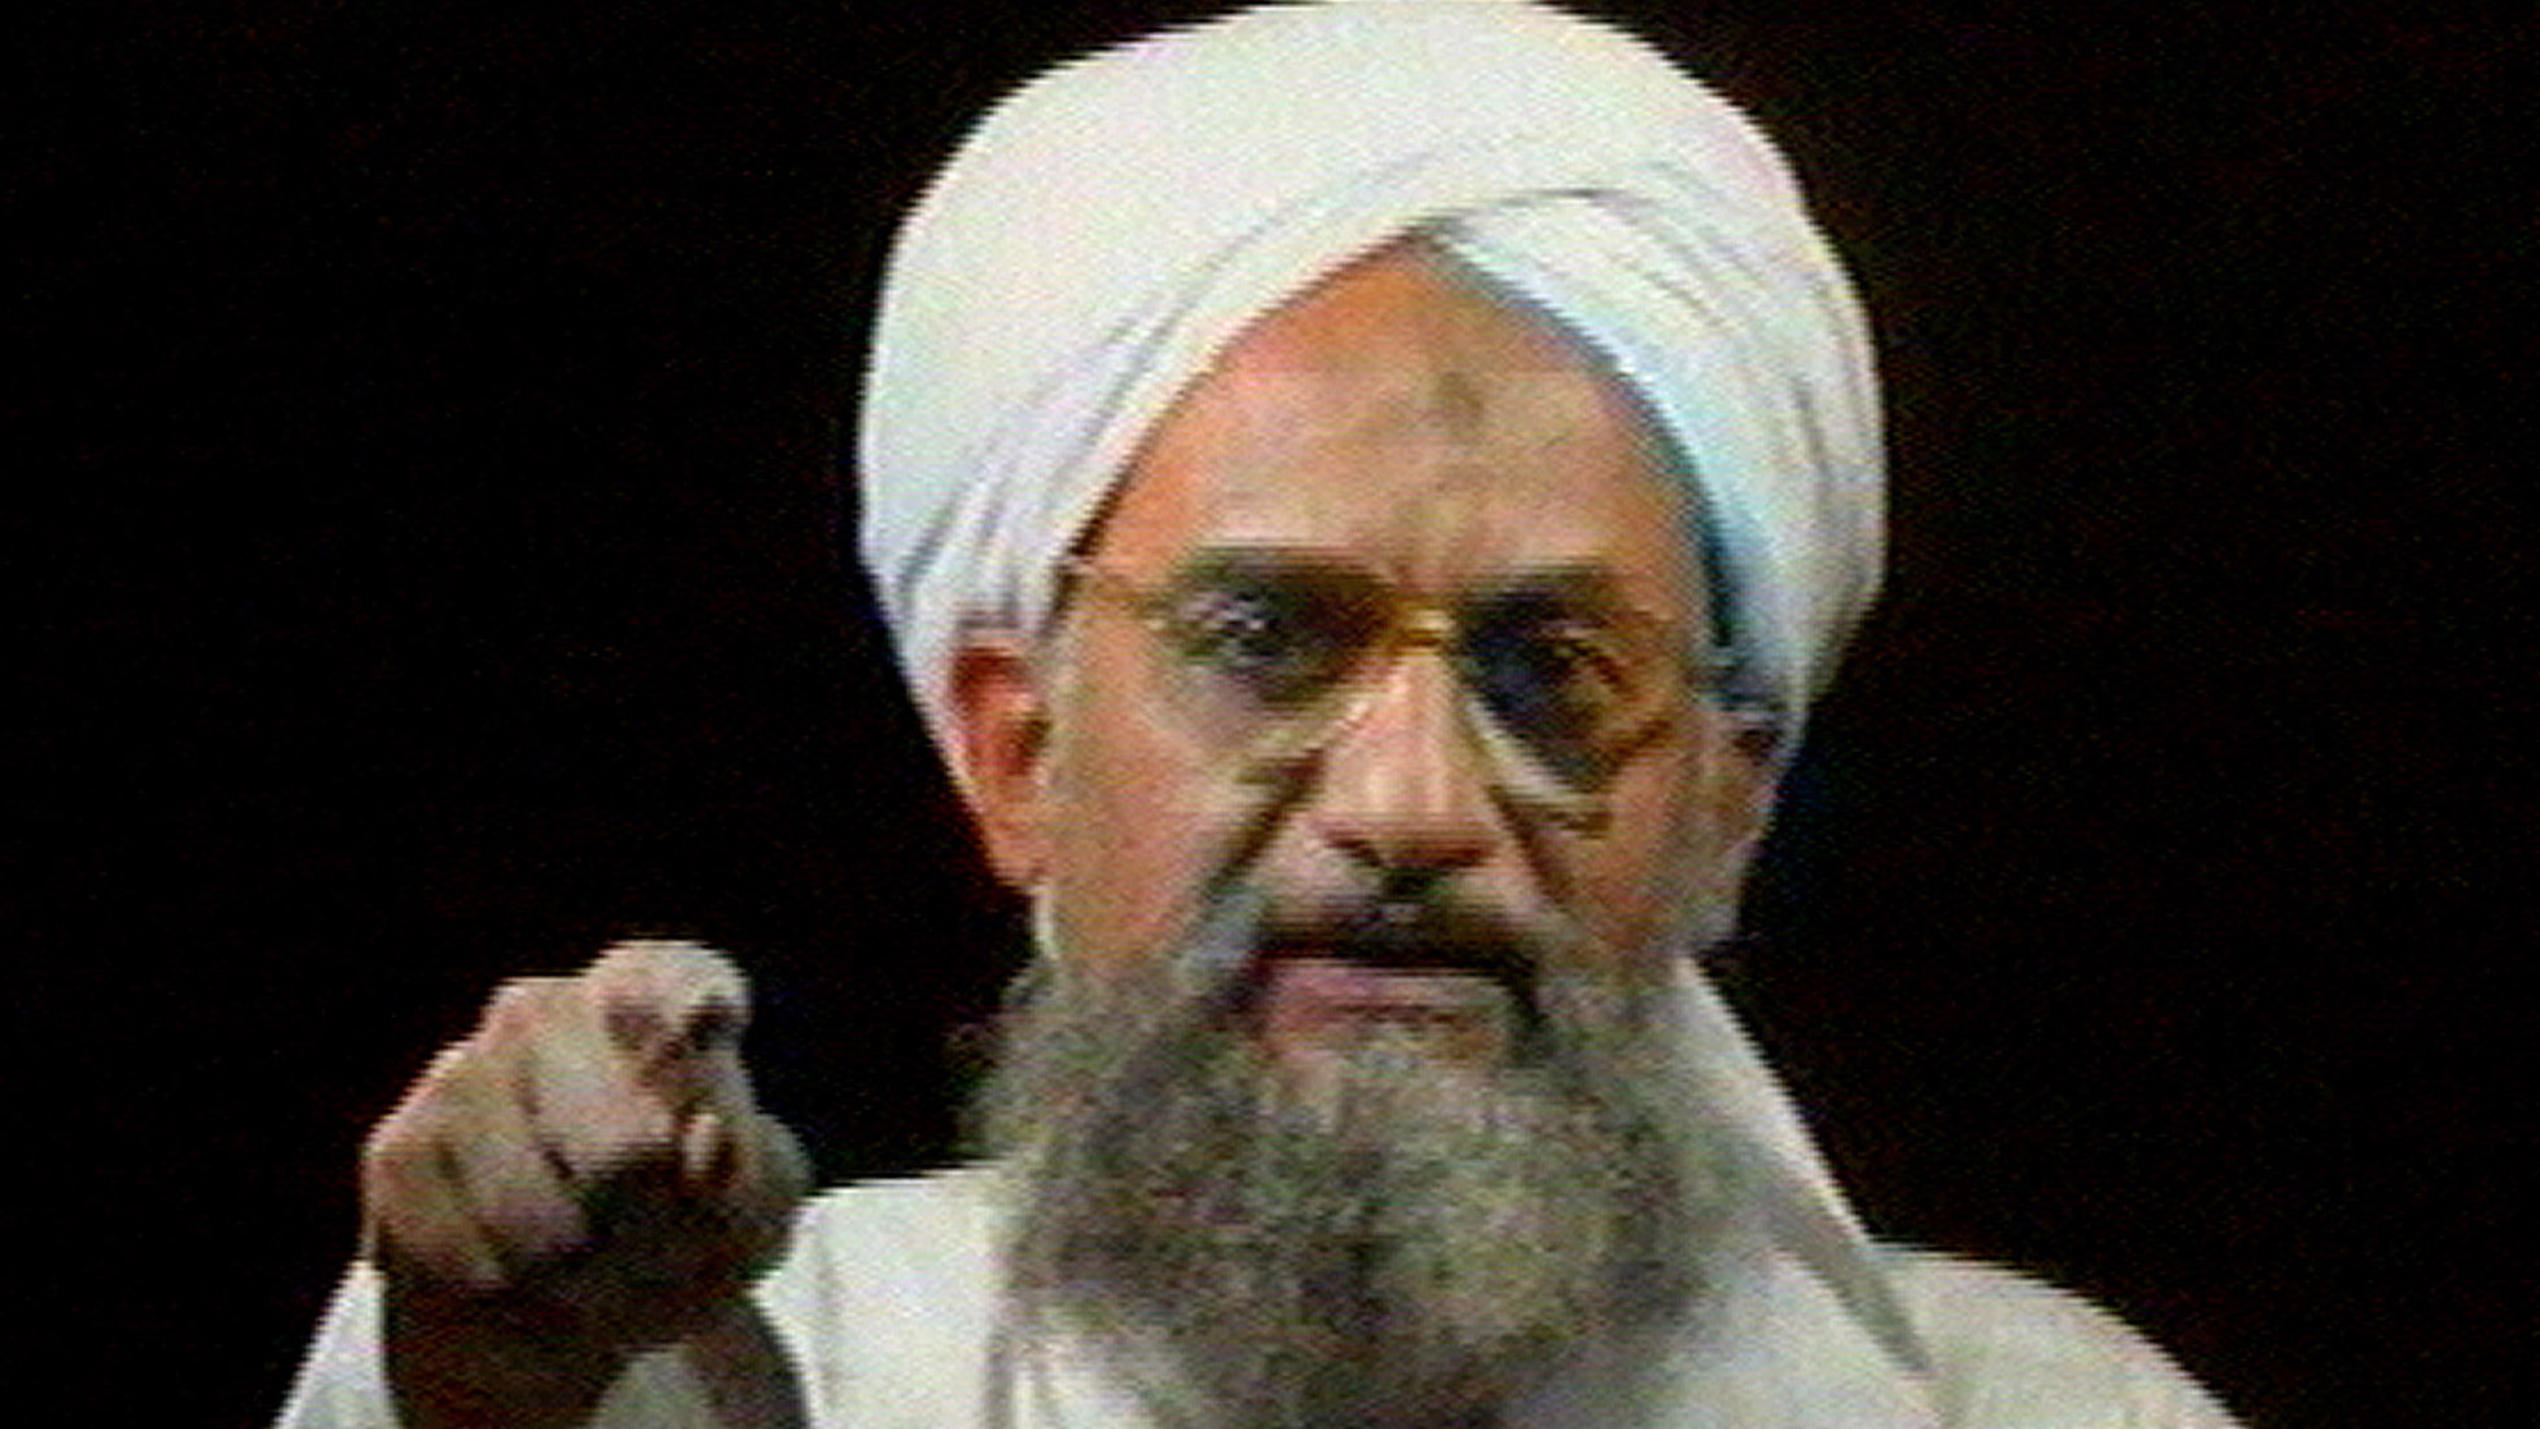 FILE - In this file image from television transmitted by the Arab news channel Al-Jazeera on Monday Jan. 30, 2006, Al-Qaida's then deputy leader Ayman al-Zawahri gestures while addressing the camera. Al-Qaida's central leadership broke with one of it